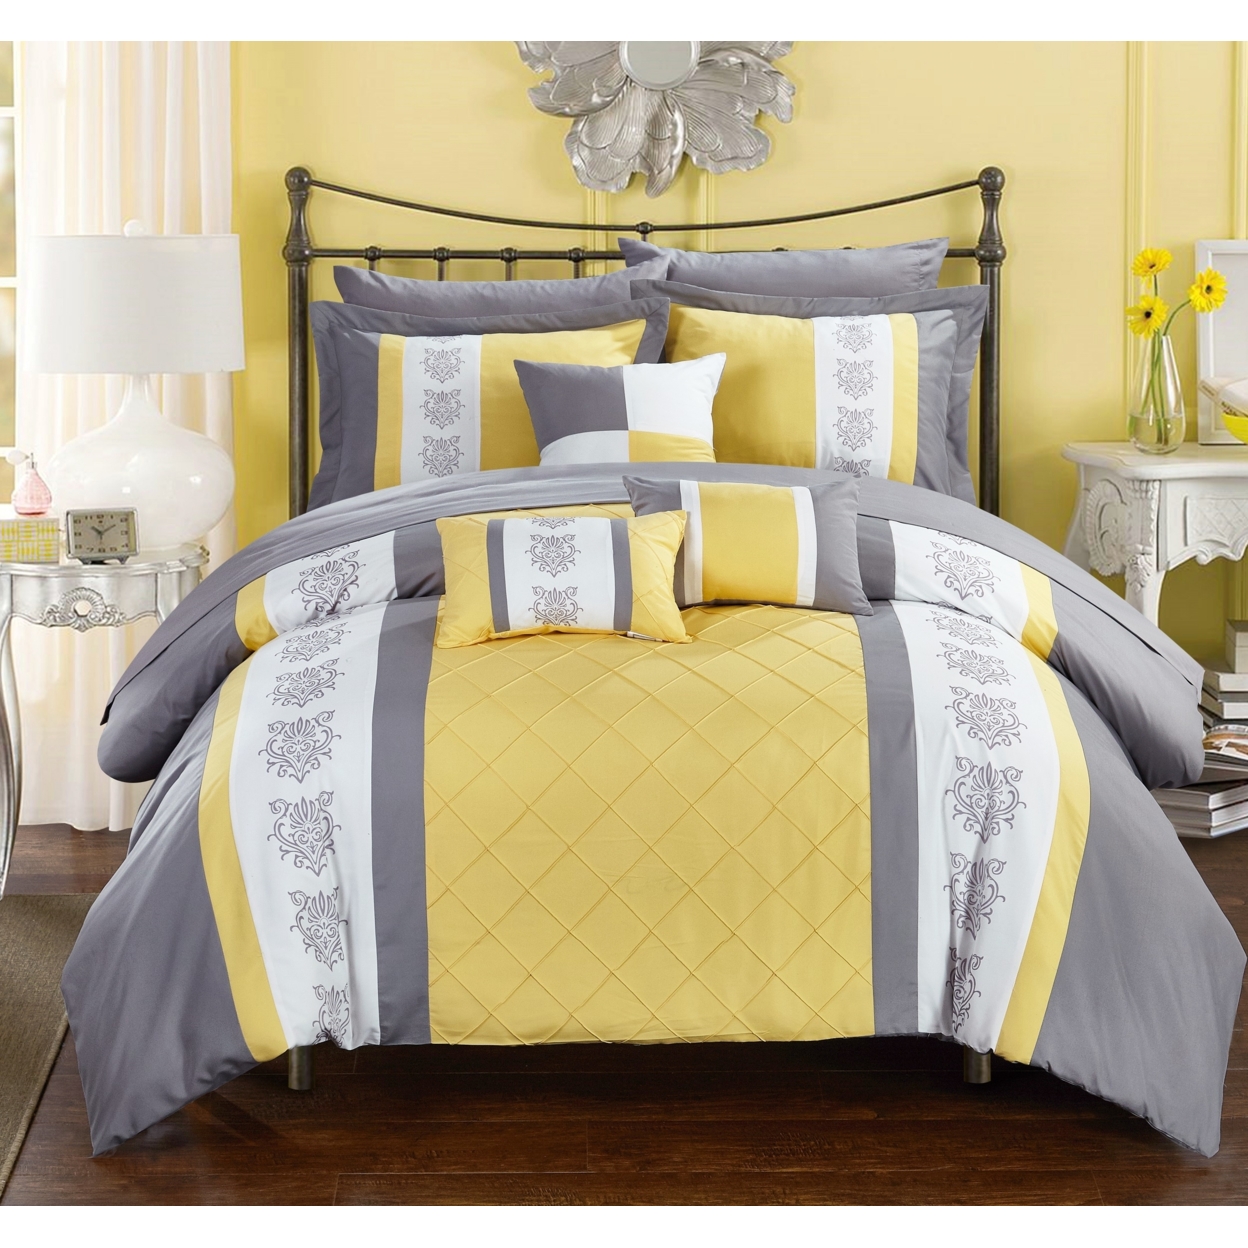 Chic Home 8/10 Piece Adam Pintuck Pieced Color Block Embroidery Bed In A Bag Comforter Set With Sheet Set - Yellow, King